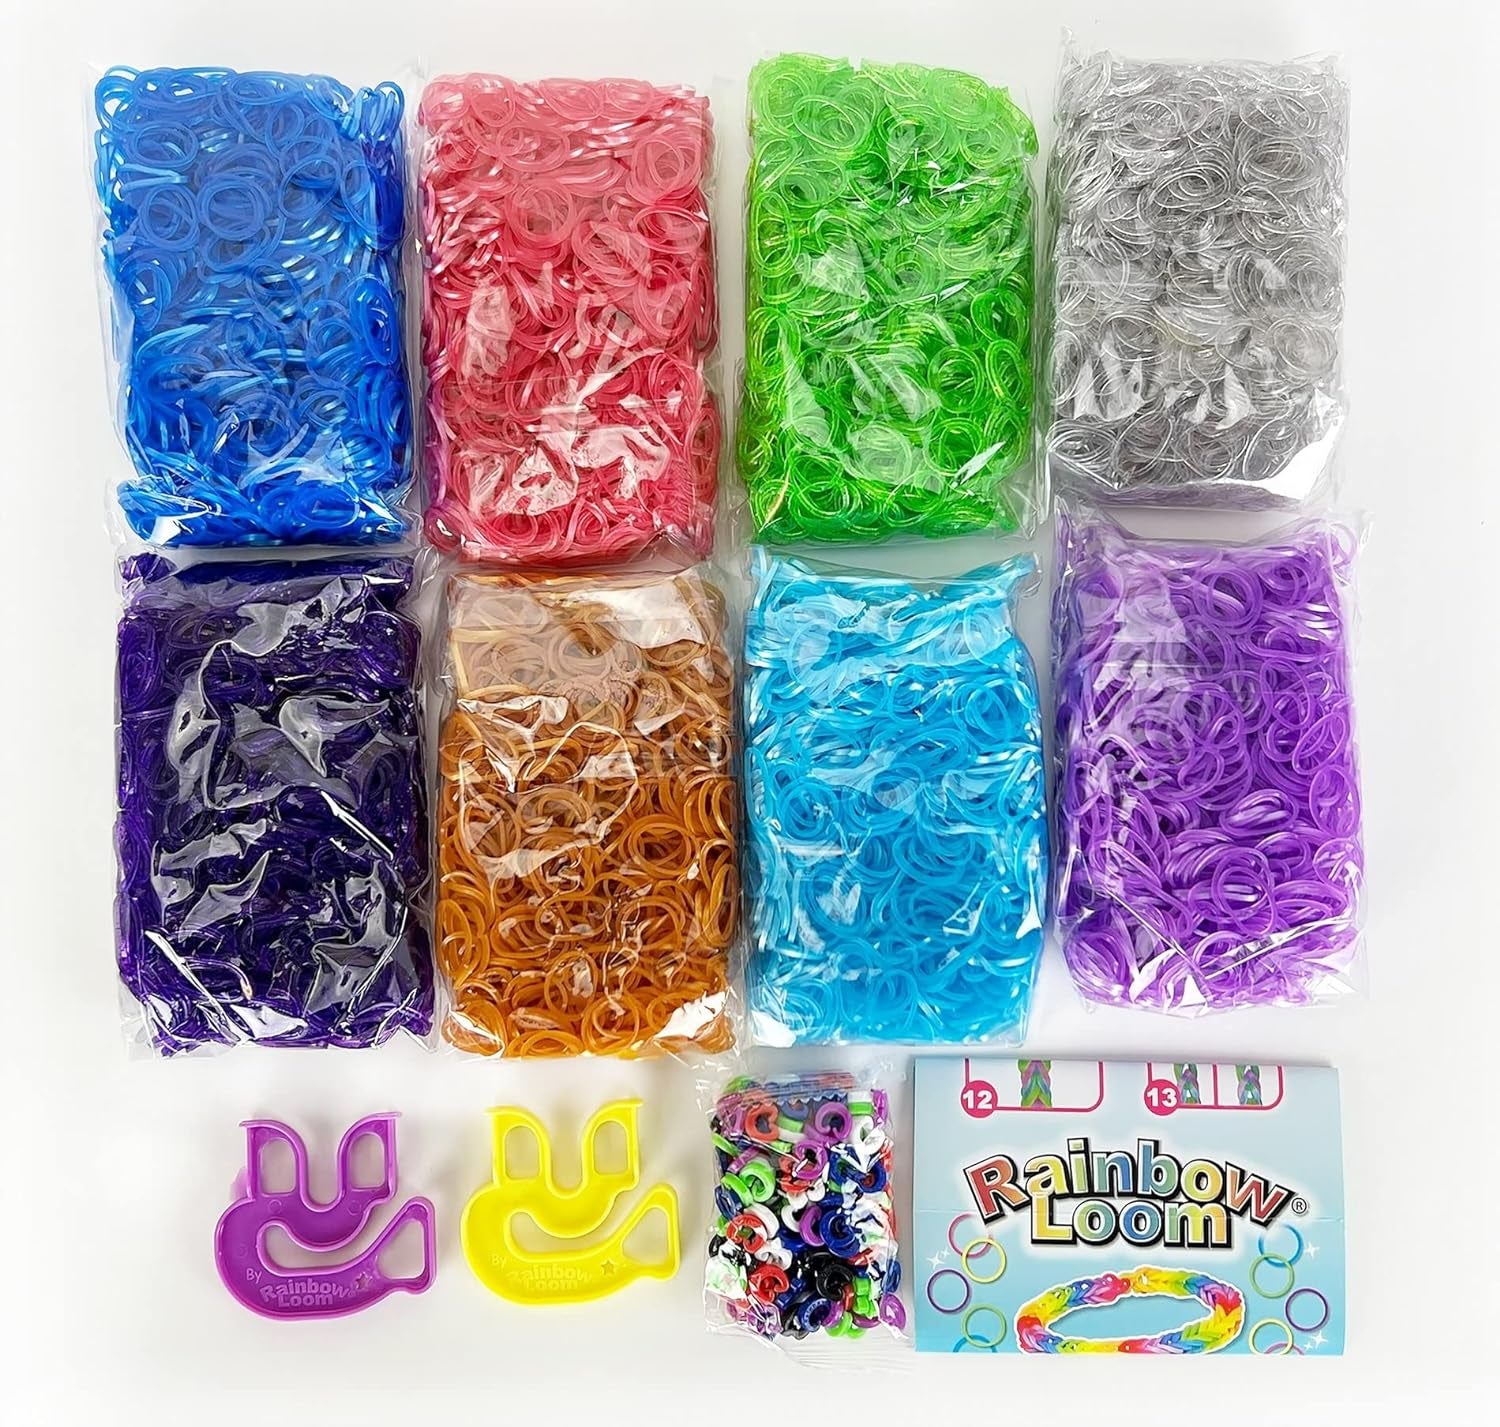 ® Treasure Box Sparkle Edition, 8,000 Rubber Bands in 8 Different Sparkly Colors, and a BONUS of 2 Happy Looms, Great Activities for Boys and Girls 7+